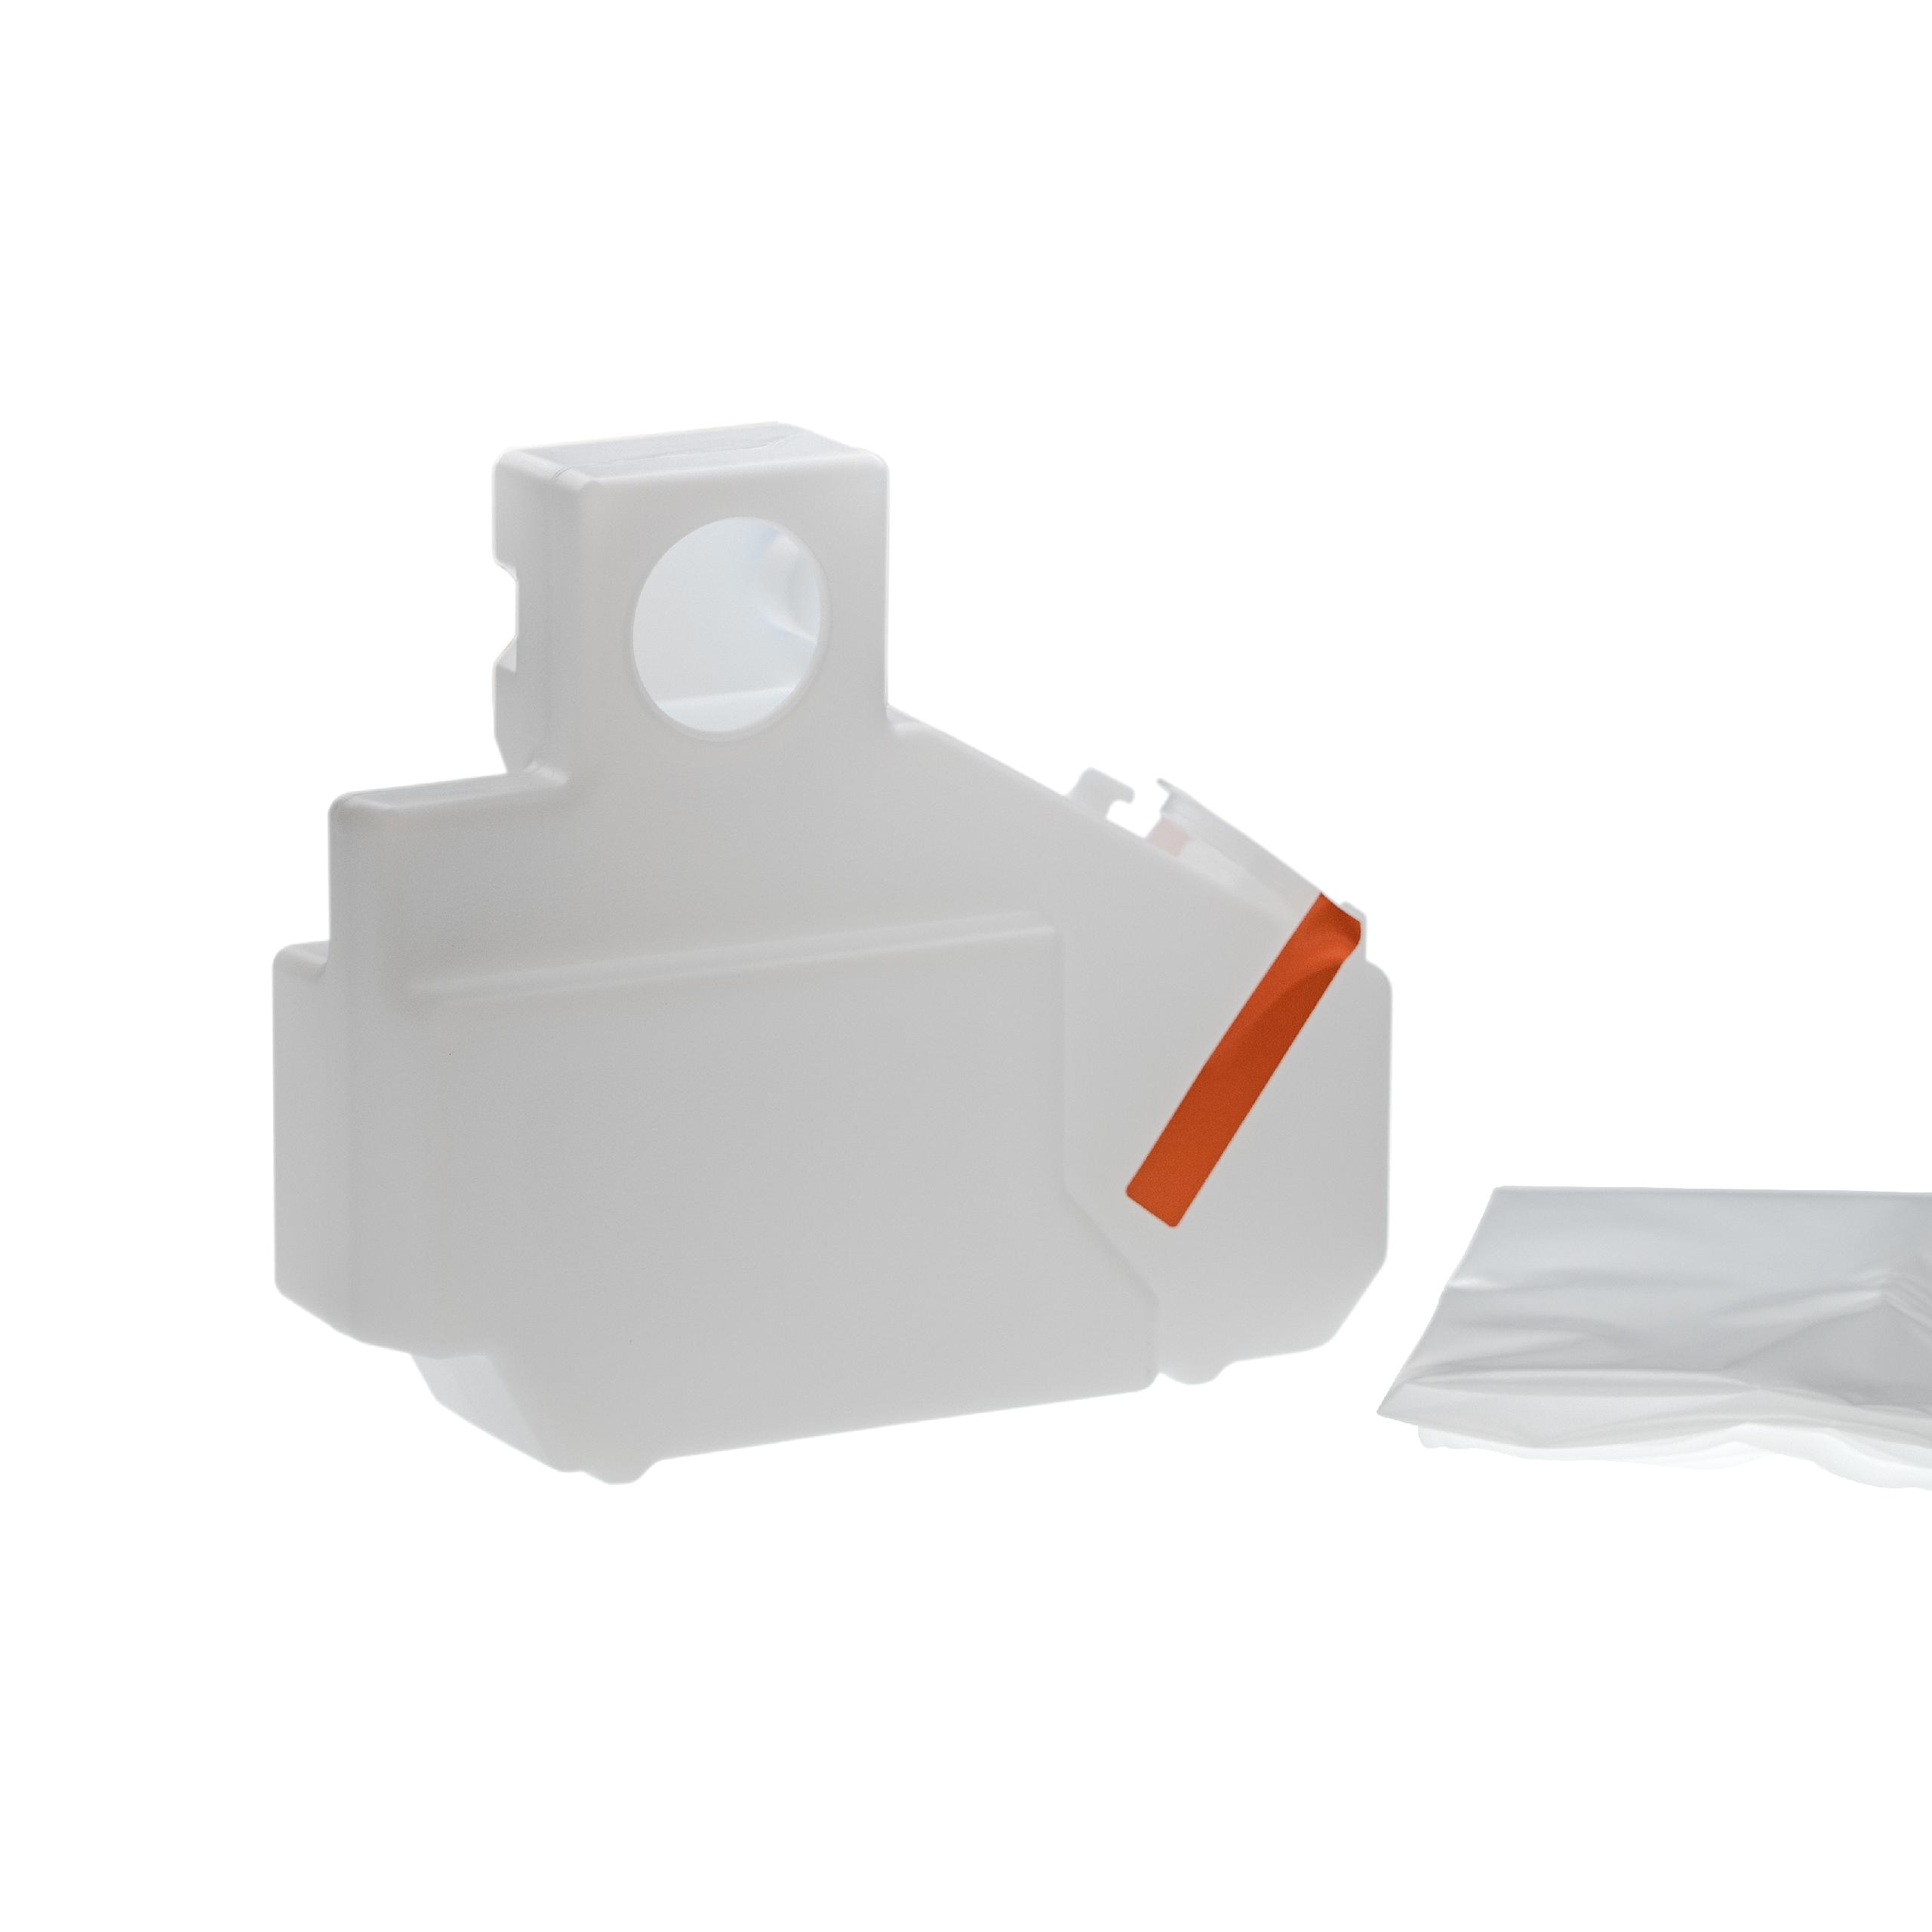 Waste Toner Container as Replacement for Canon FM3-9276-030, WT-101, FM3-9276-000 - White